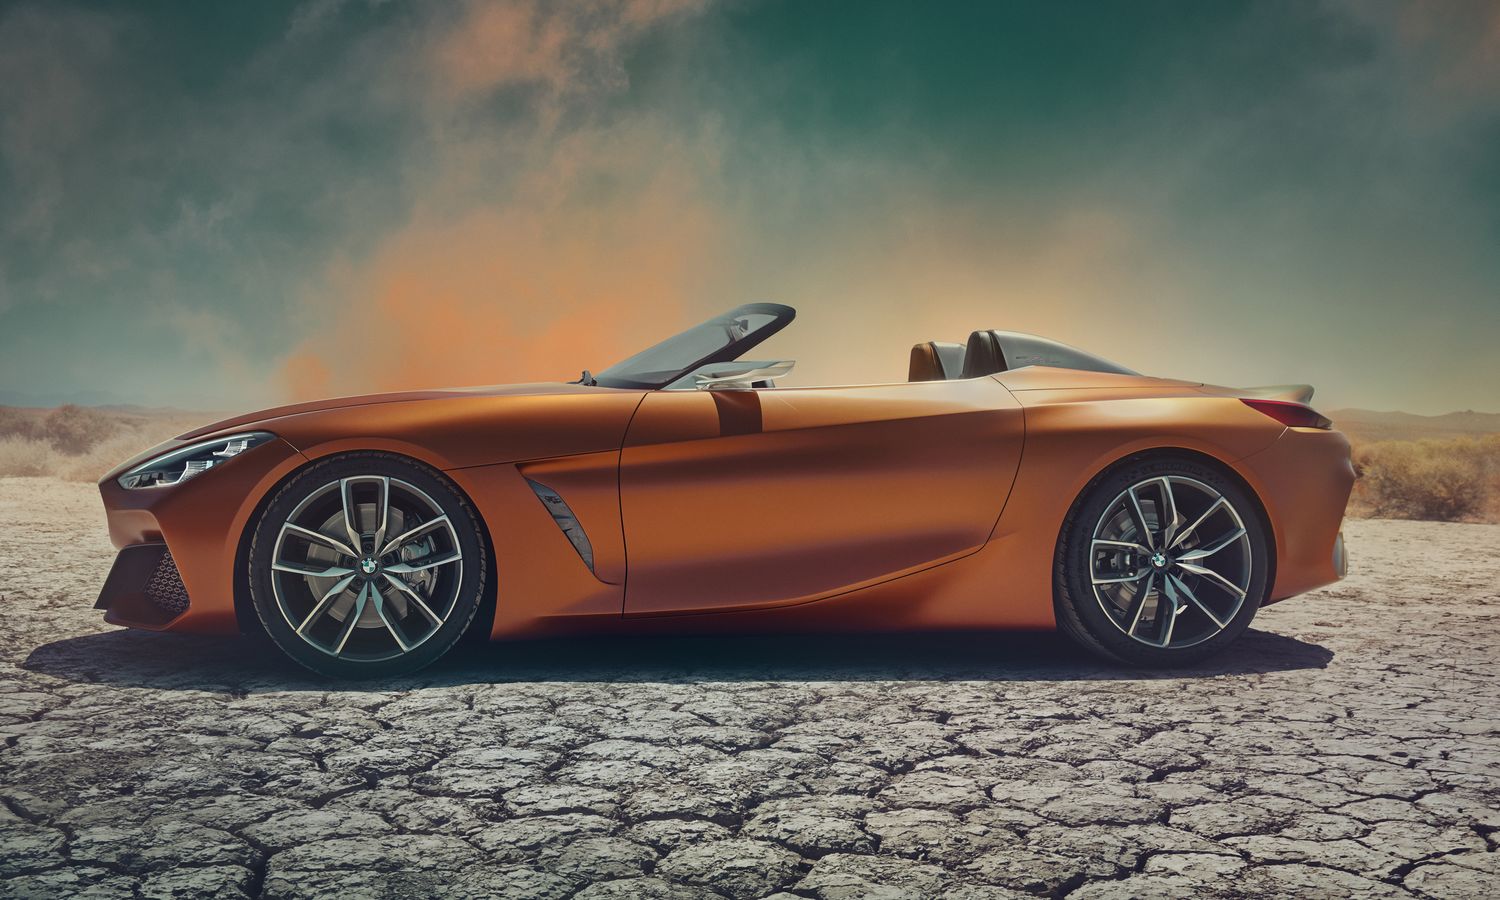 The initial Z4 concept model revealed in mid-2017